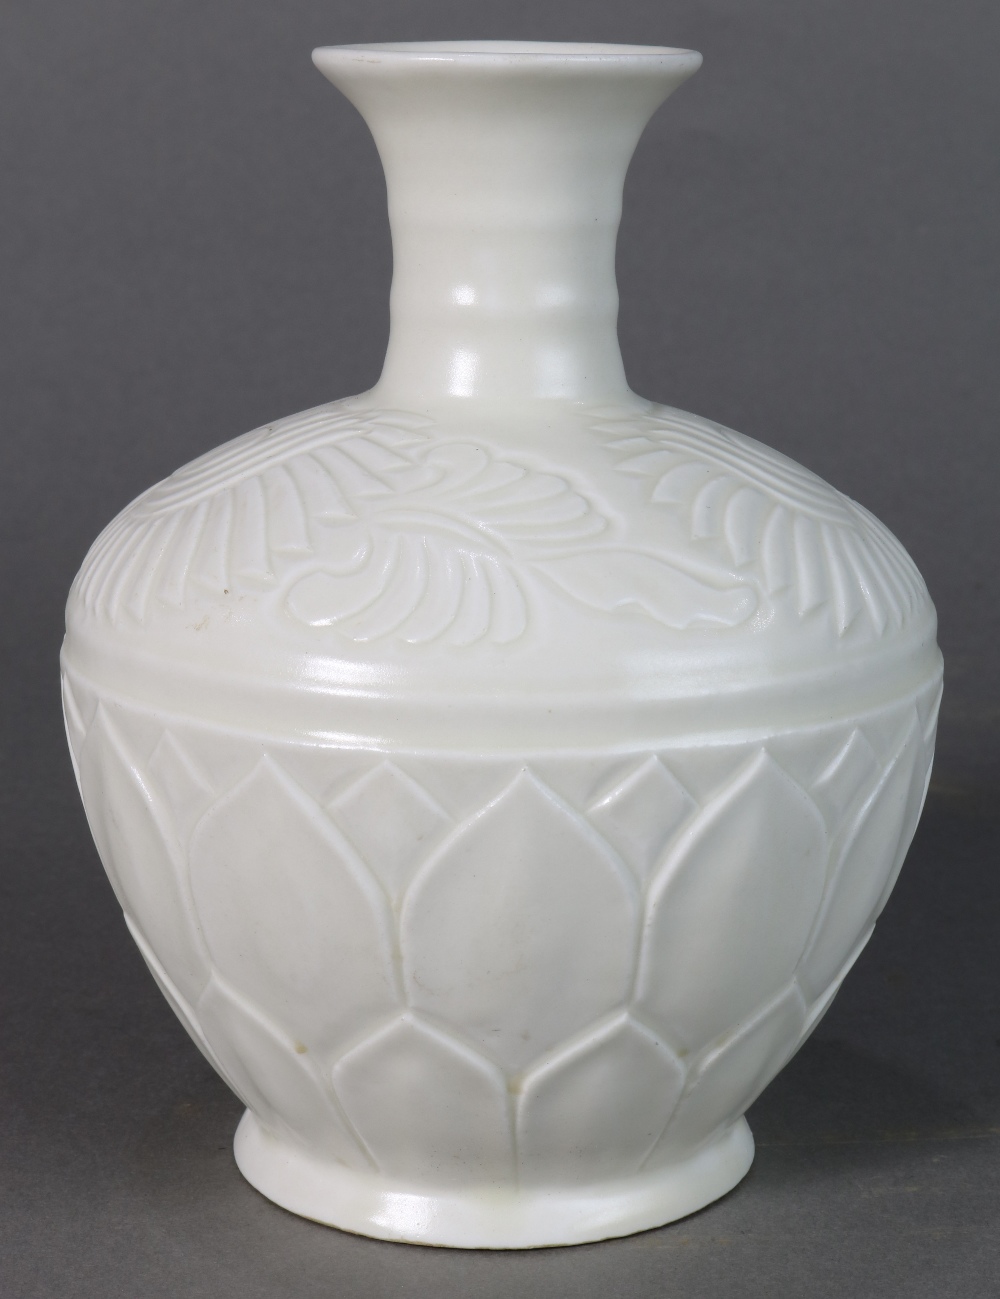 Chinese Ding-type ceramic vase, with a flared neck and a shoulder molded with stylized lotus - Image 3 of 6